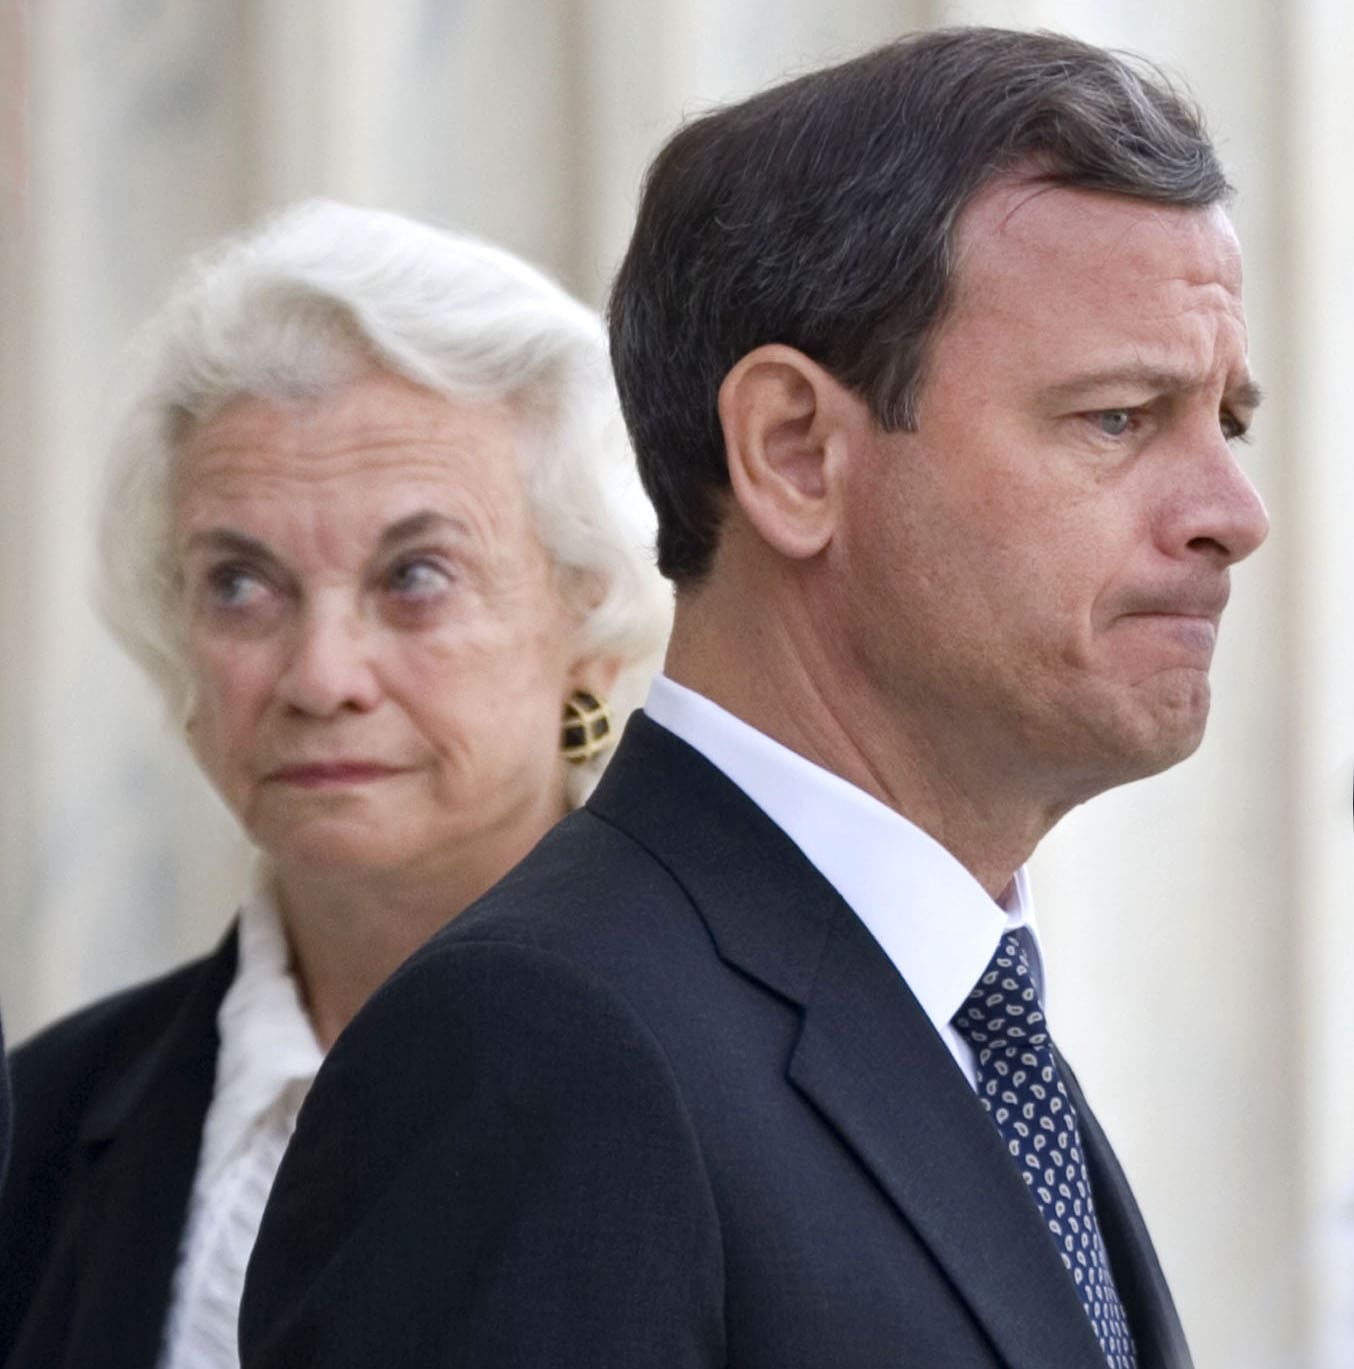 John Roberts and Justice O’Connor at Supreme Court during memorial for Chief Justice Rehnquist